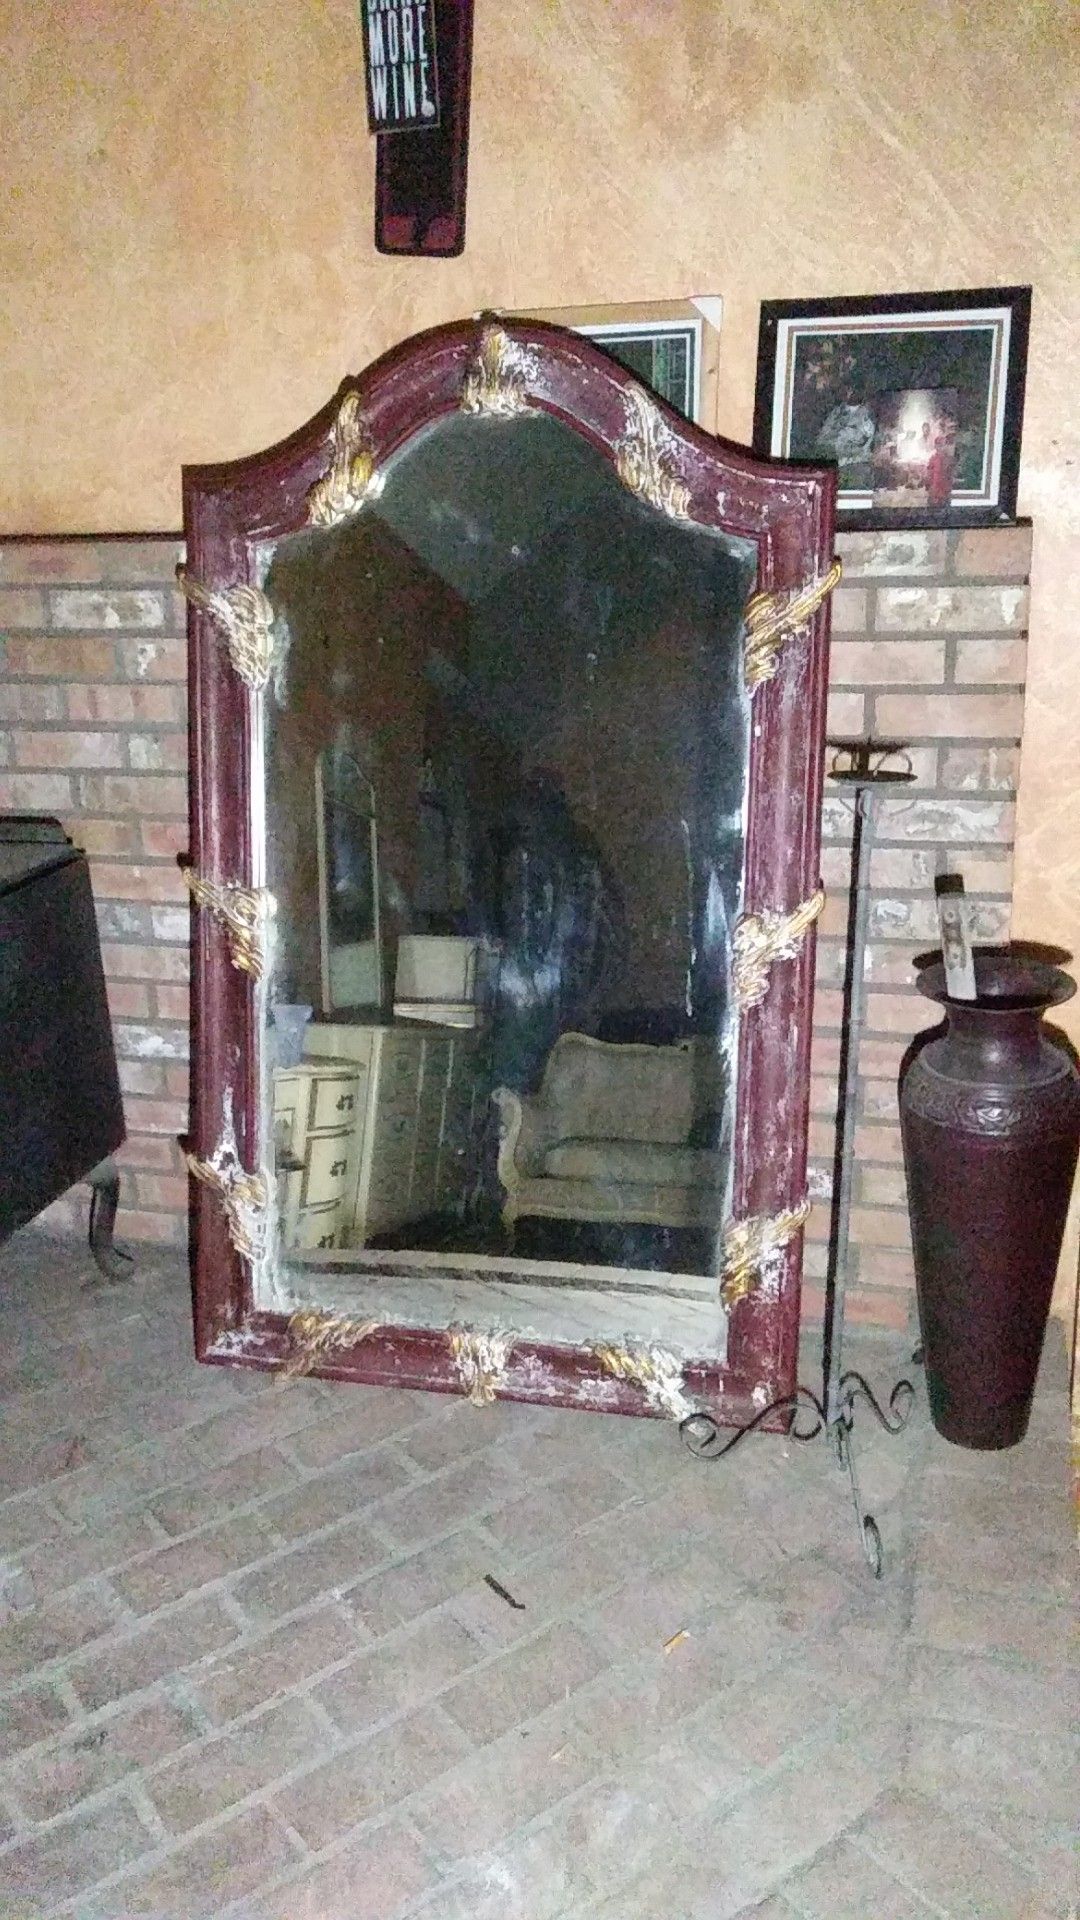 5foot Tall Mirror was a prop in movies